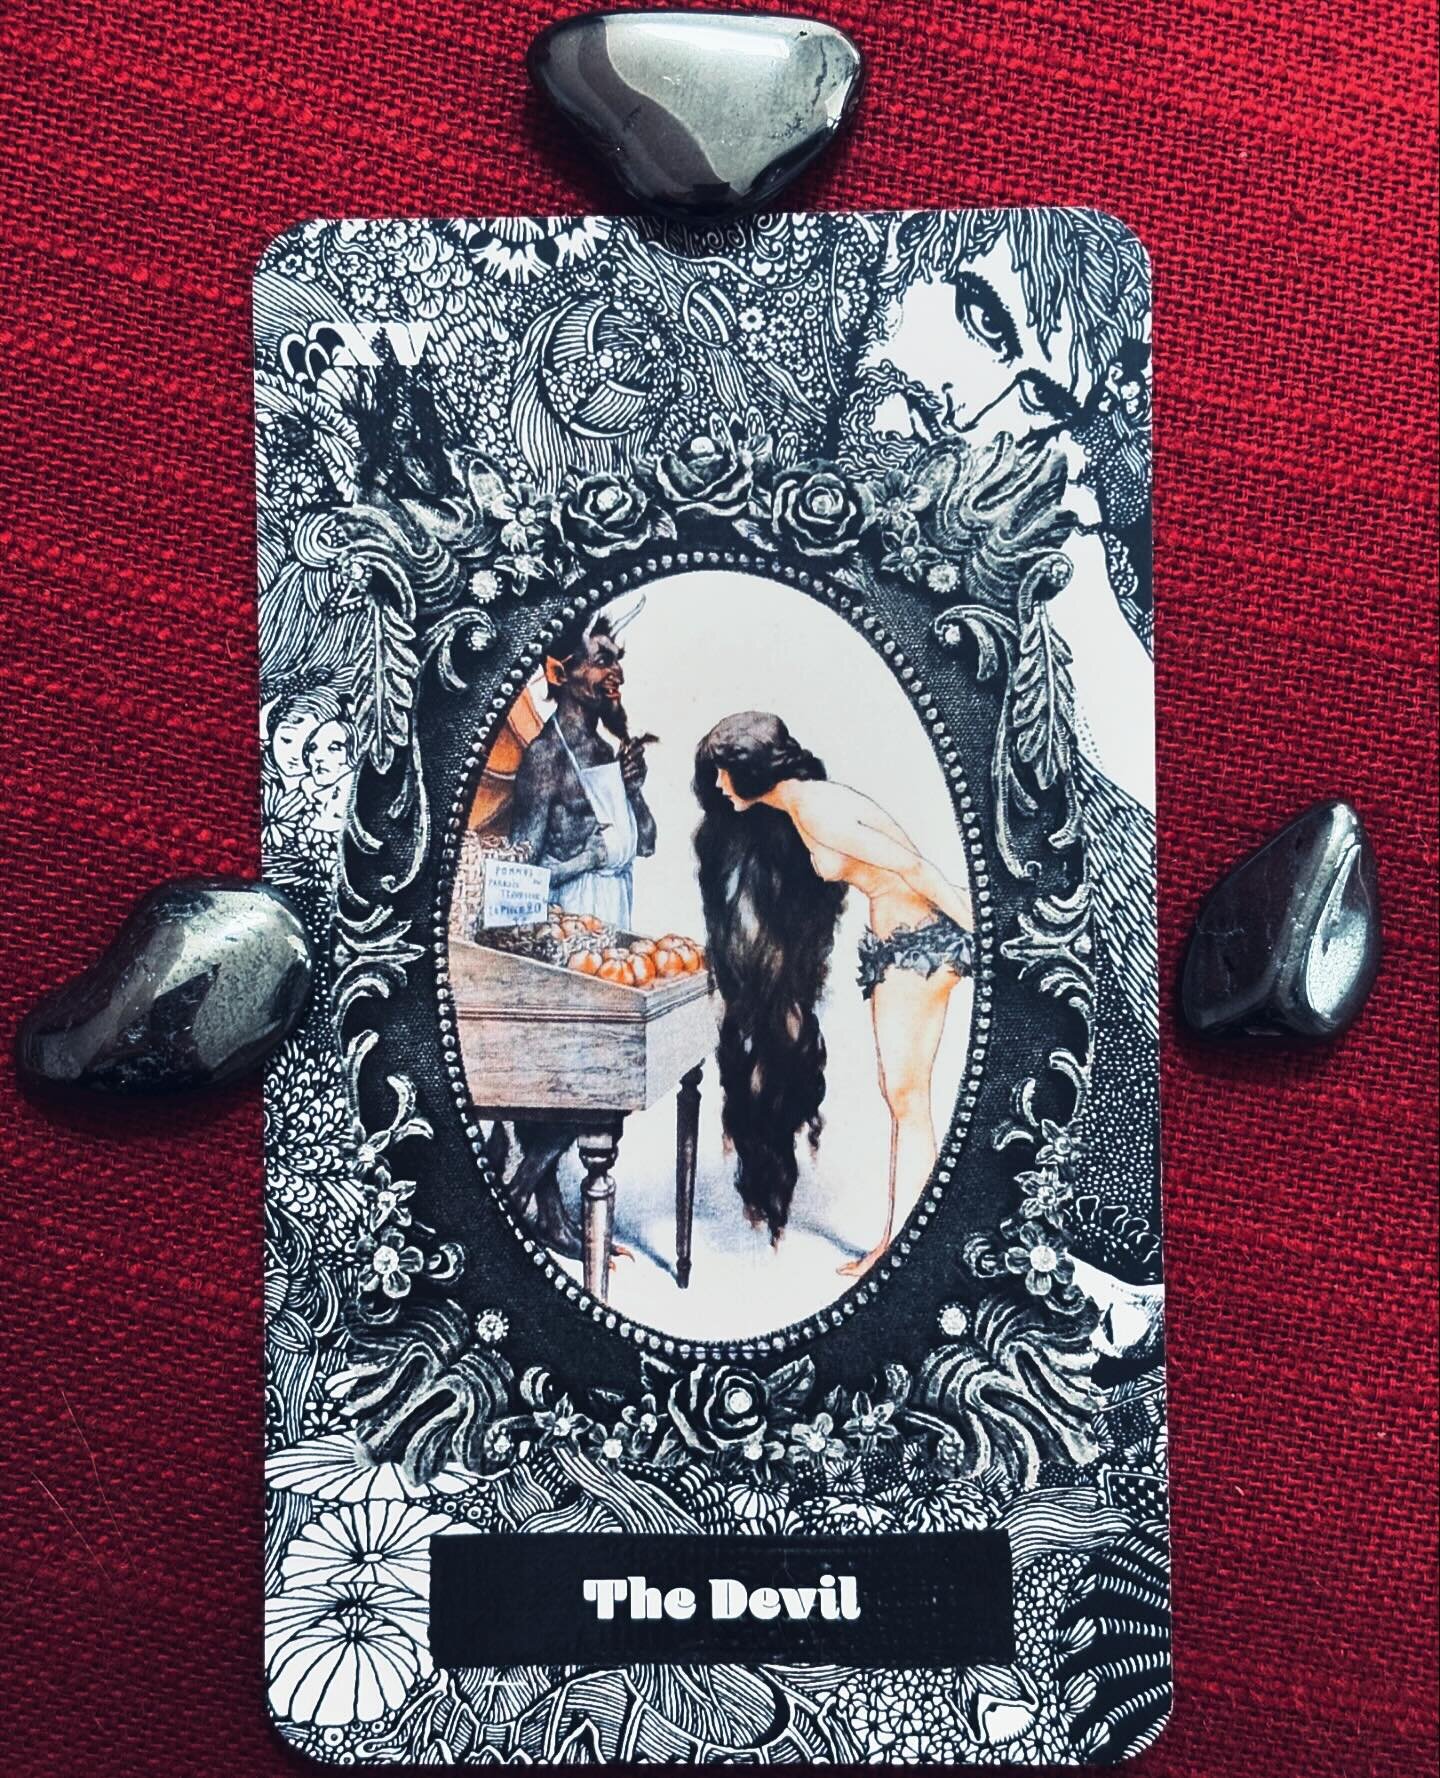 15. The Devil 🏴

When you get the Devil in a reading, usually there is no beating around the bush. You&rsquo;re messing up somewhere and you know it deep down. 

This card points to toxic patterns that we keep repeating over and over again. Compulsi